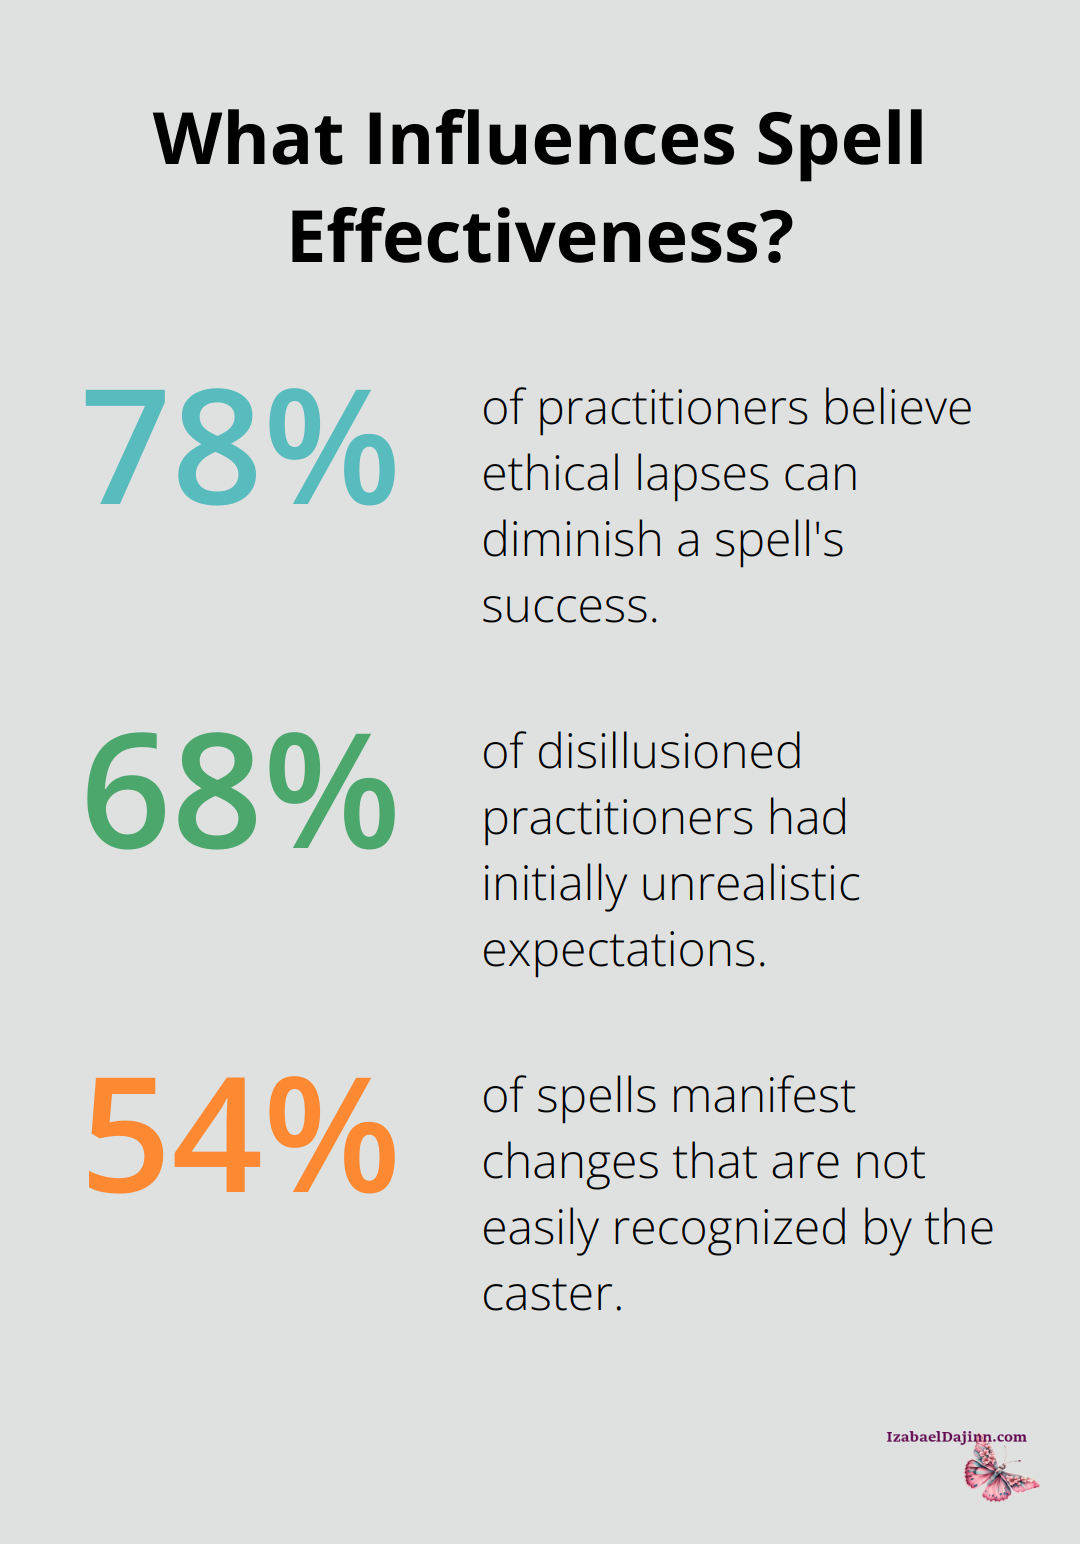 Fact - What Influences Spell Effectiveness?